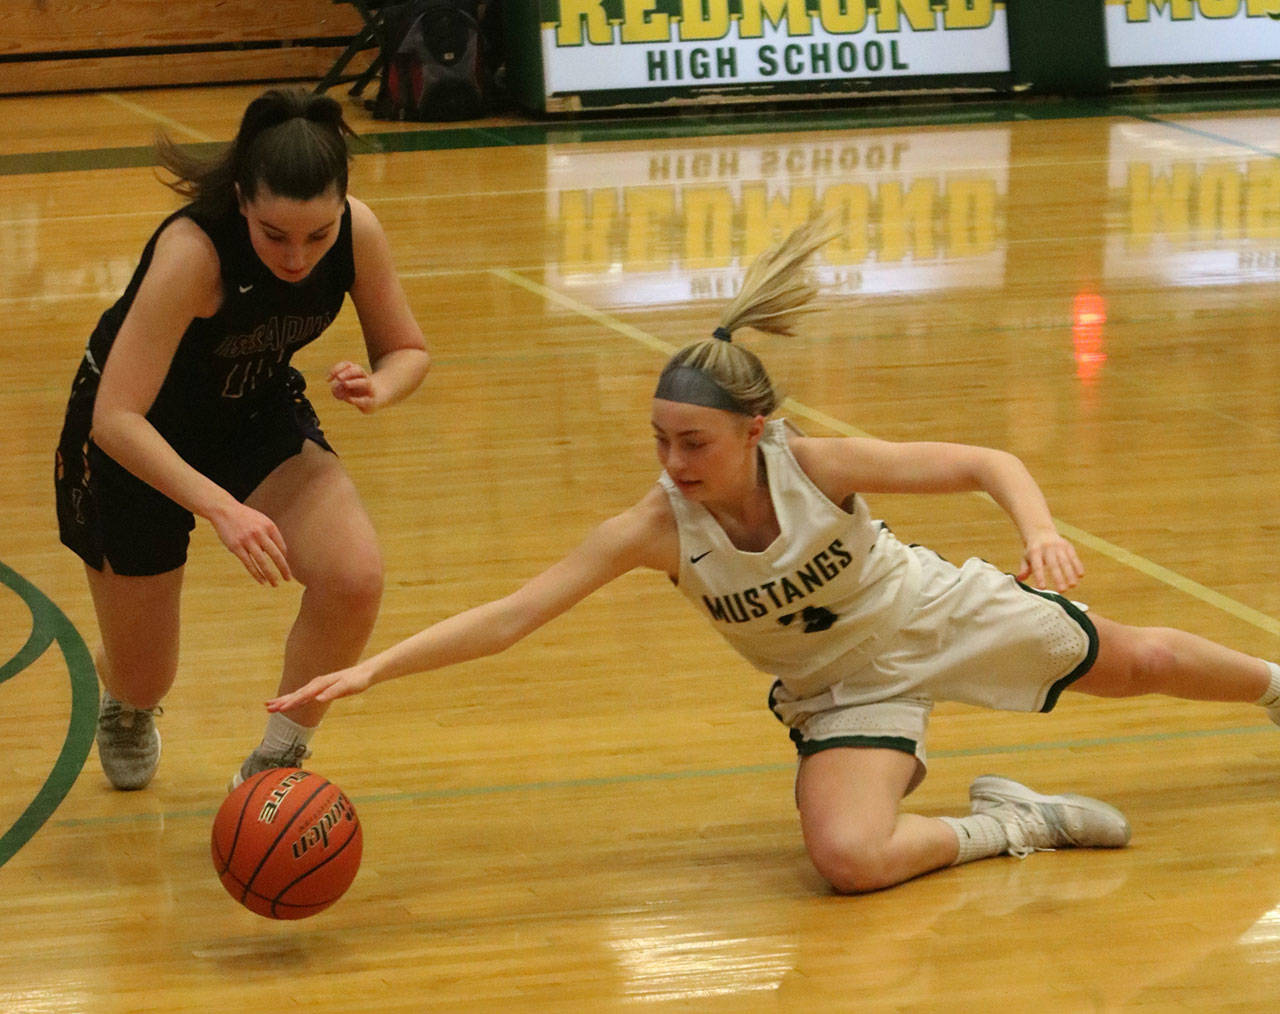 Redmond’s Willow Thom, right, dives for the ball in Tuesday night’s game against Issaquah. Andy Nystrom/ staff photo